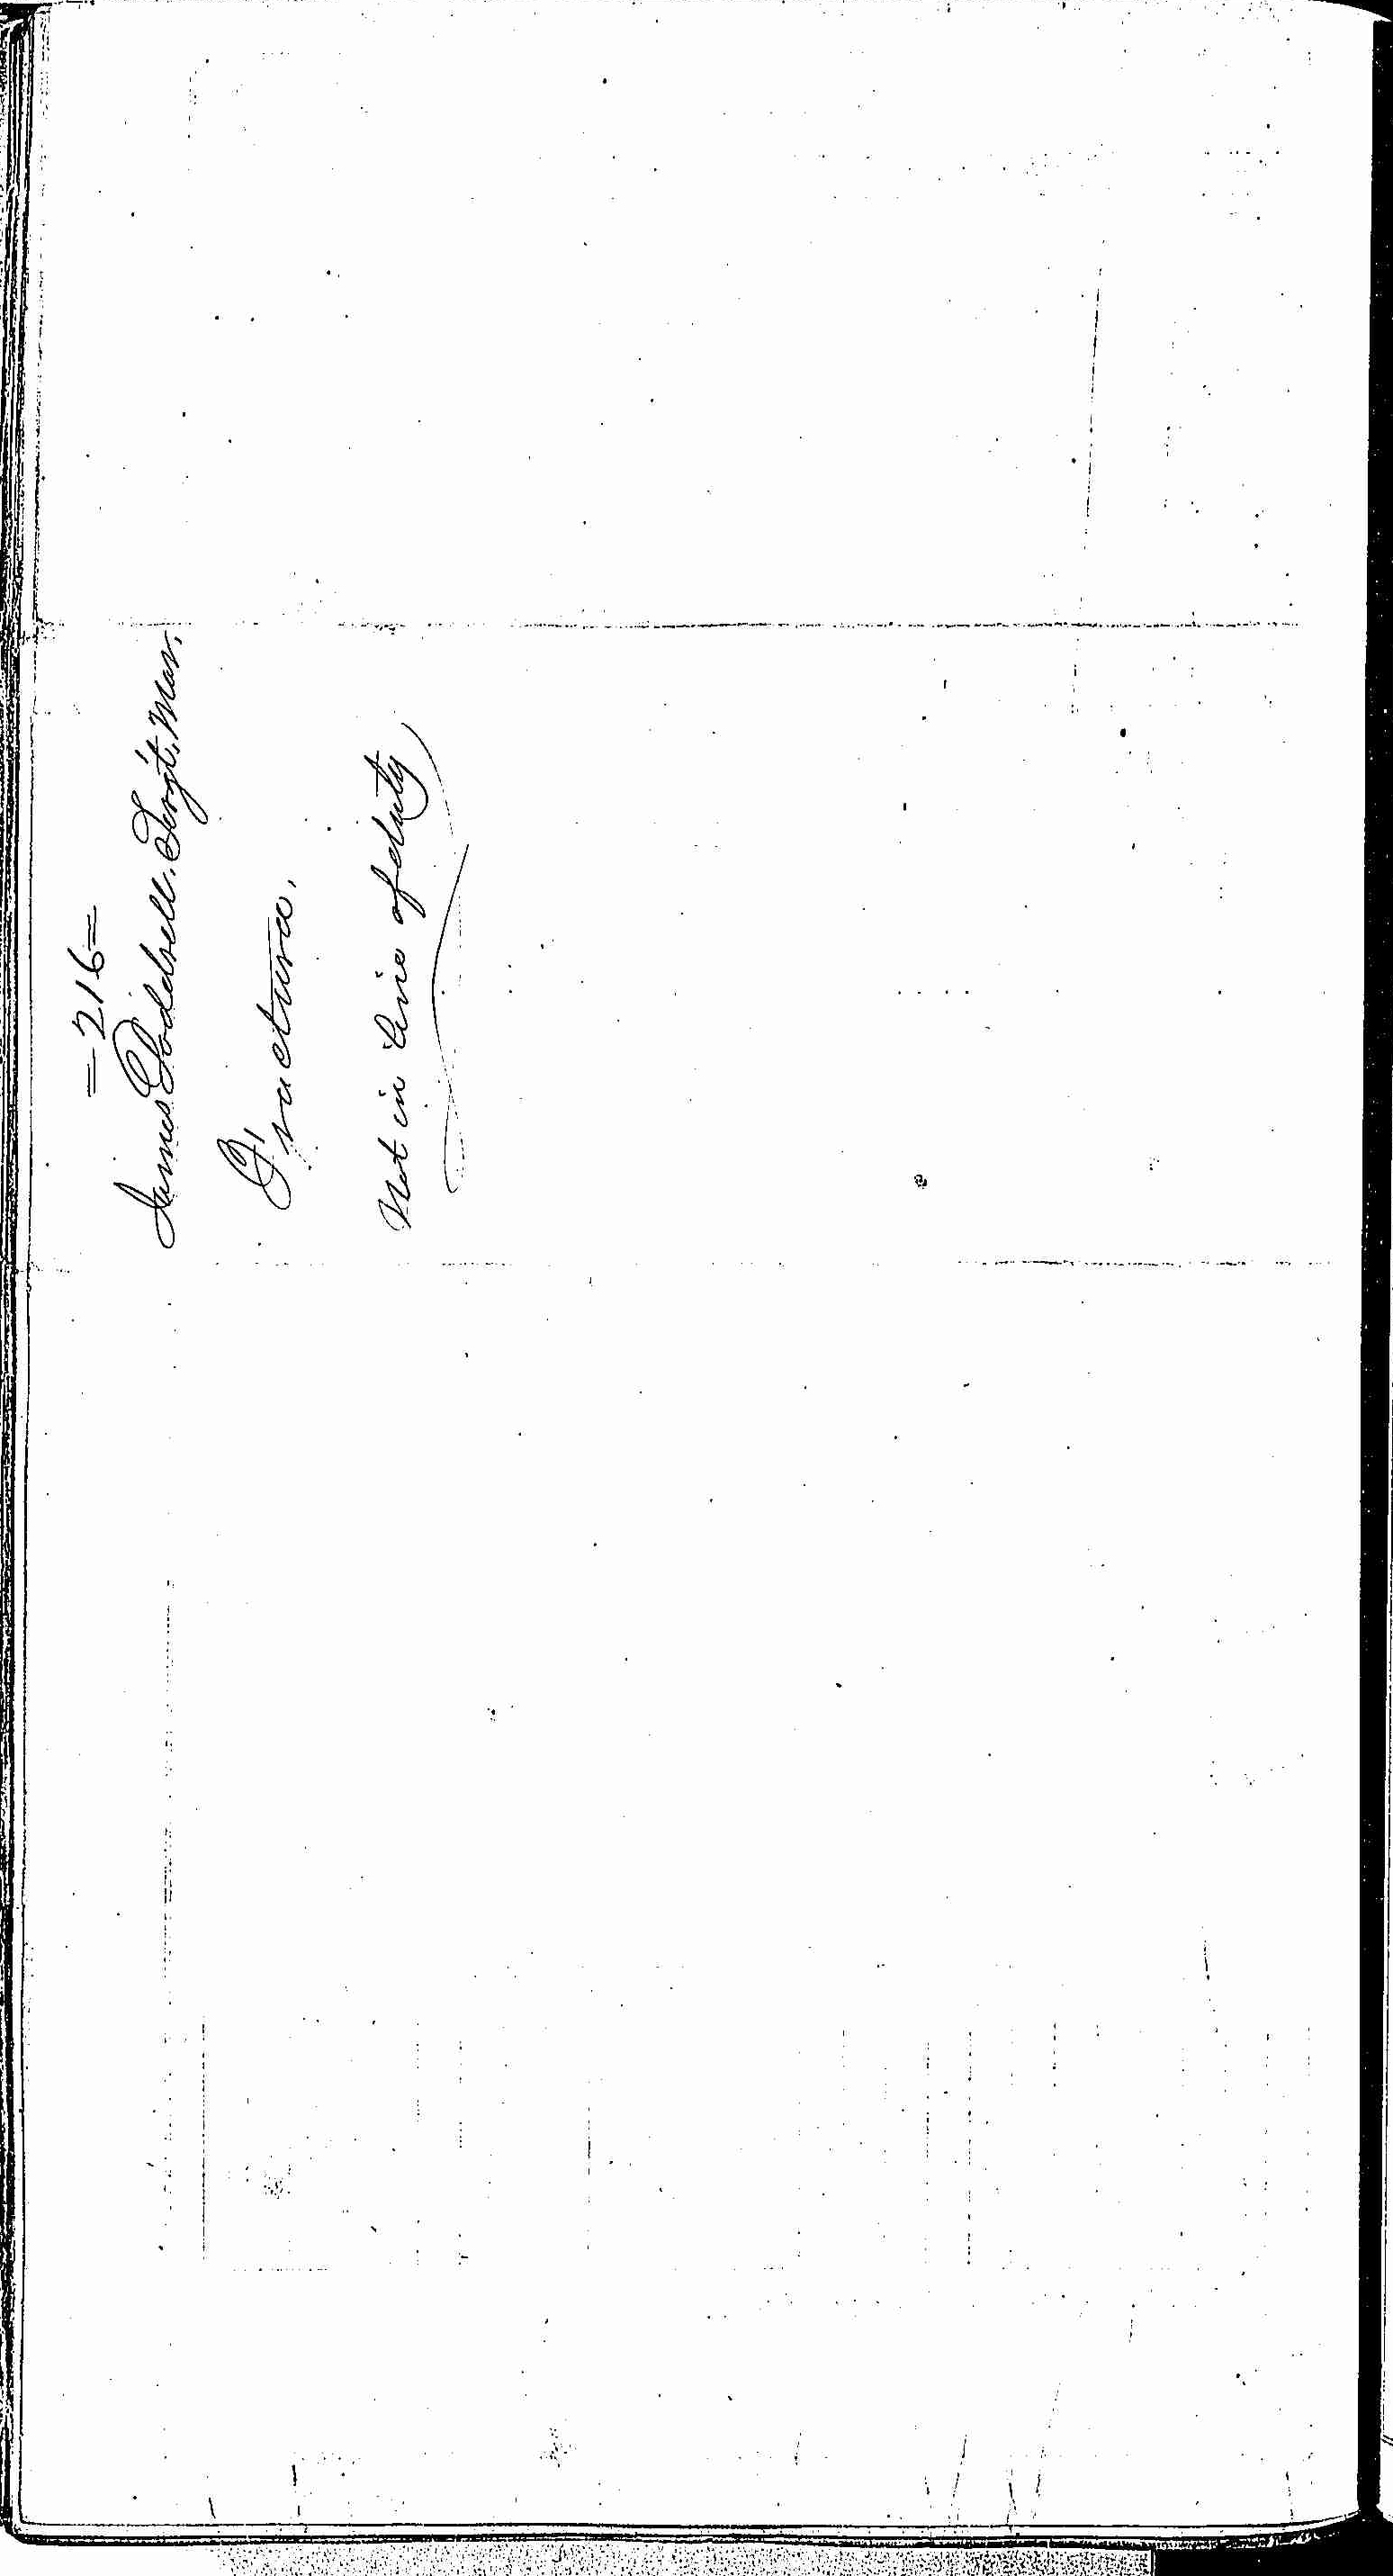 Entry for James Doddrell (second admission page 2 of 2) in the log Hospital Tickets and Case Papers - Naval Hospital - Washington, D.C. - 1866-68